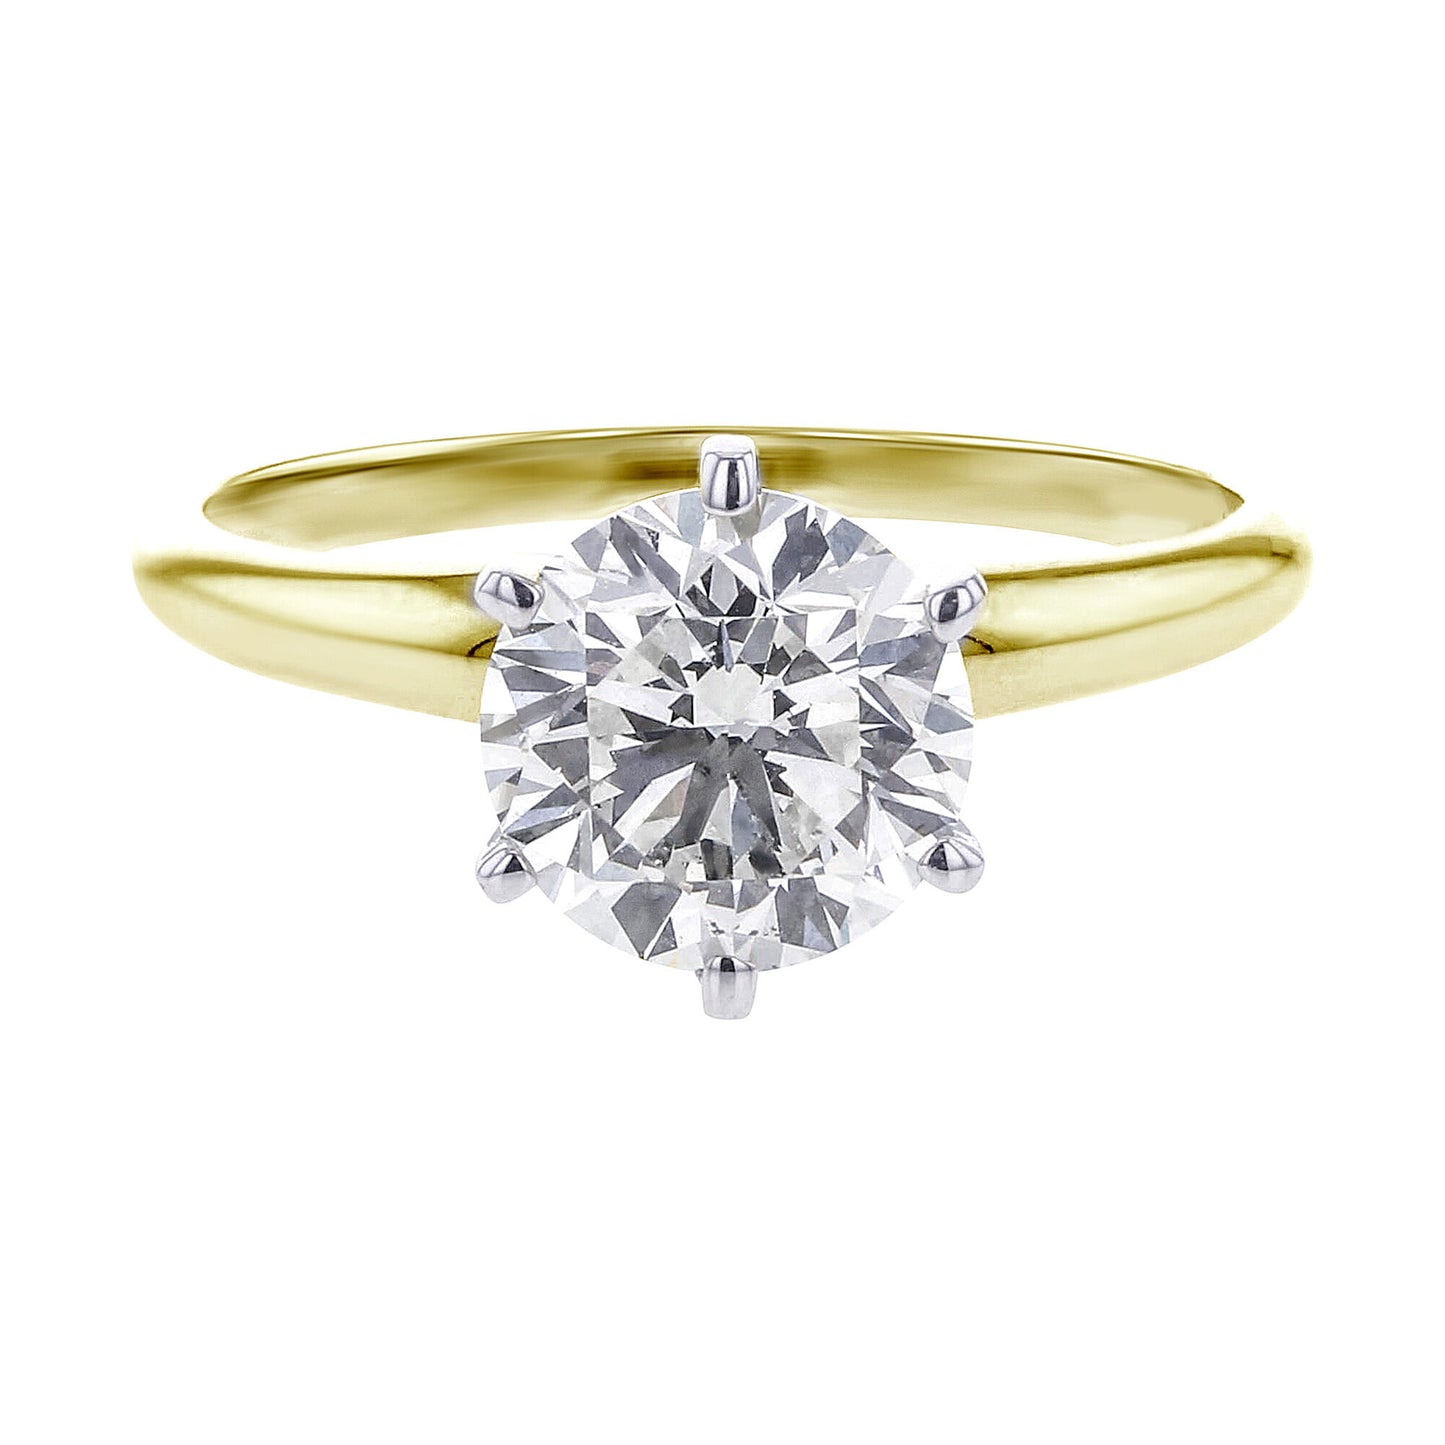 Christa Ready For Love Diamond Engagement Ring 2CT